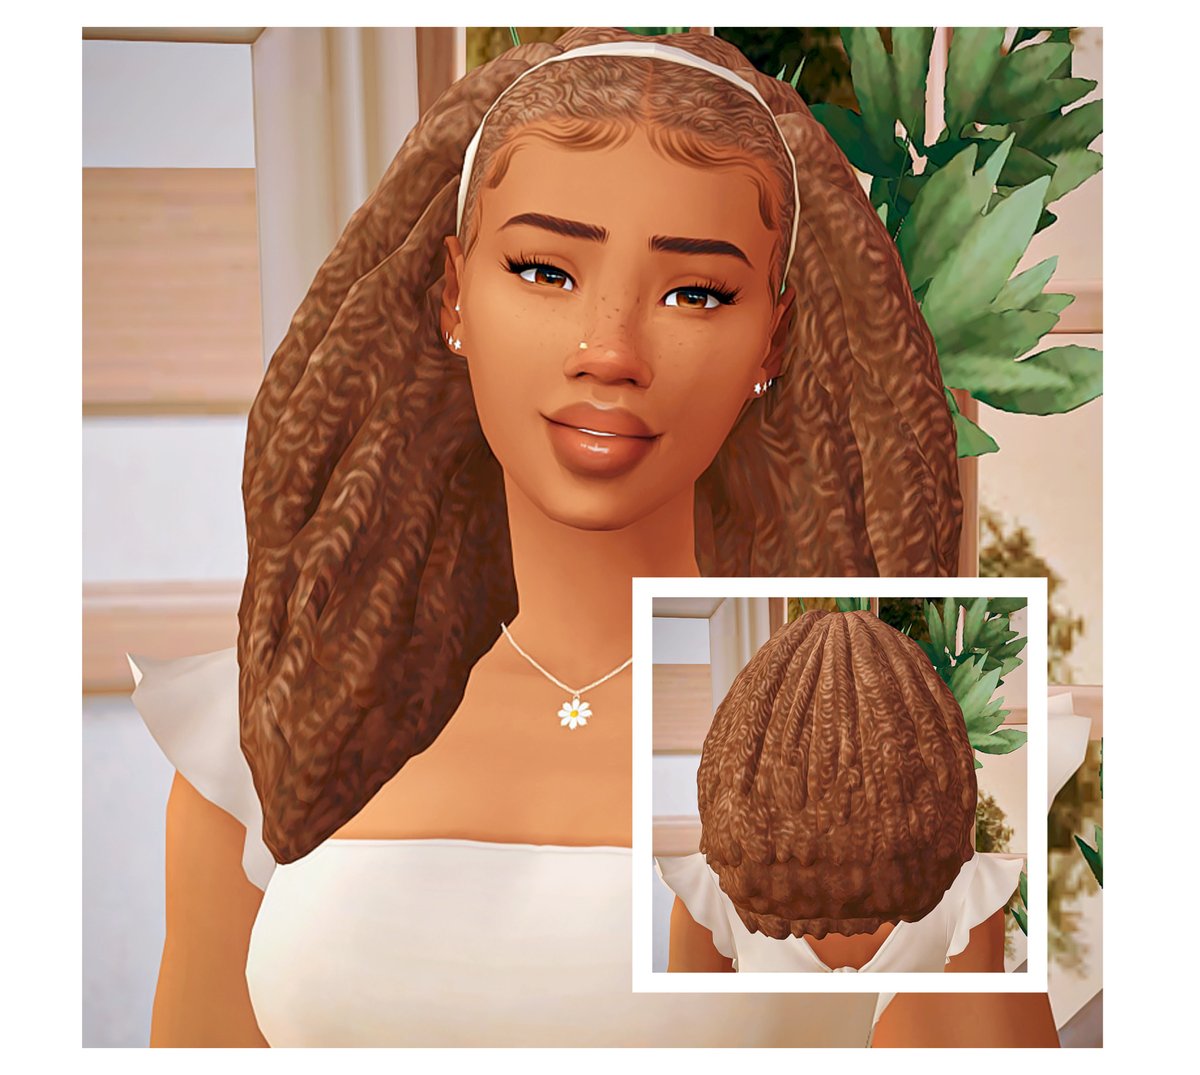 Been wanting a hair like this for a while so i made it :D 
Download Here - tumblr.com/shysimblr/7199…
#ts4cc #sims4cc #ts4hair #sims4hair #ts4download #sims4download